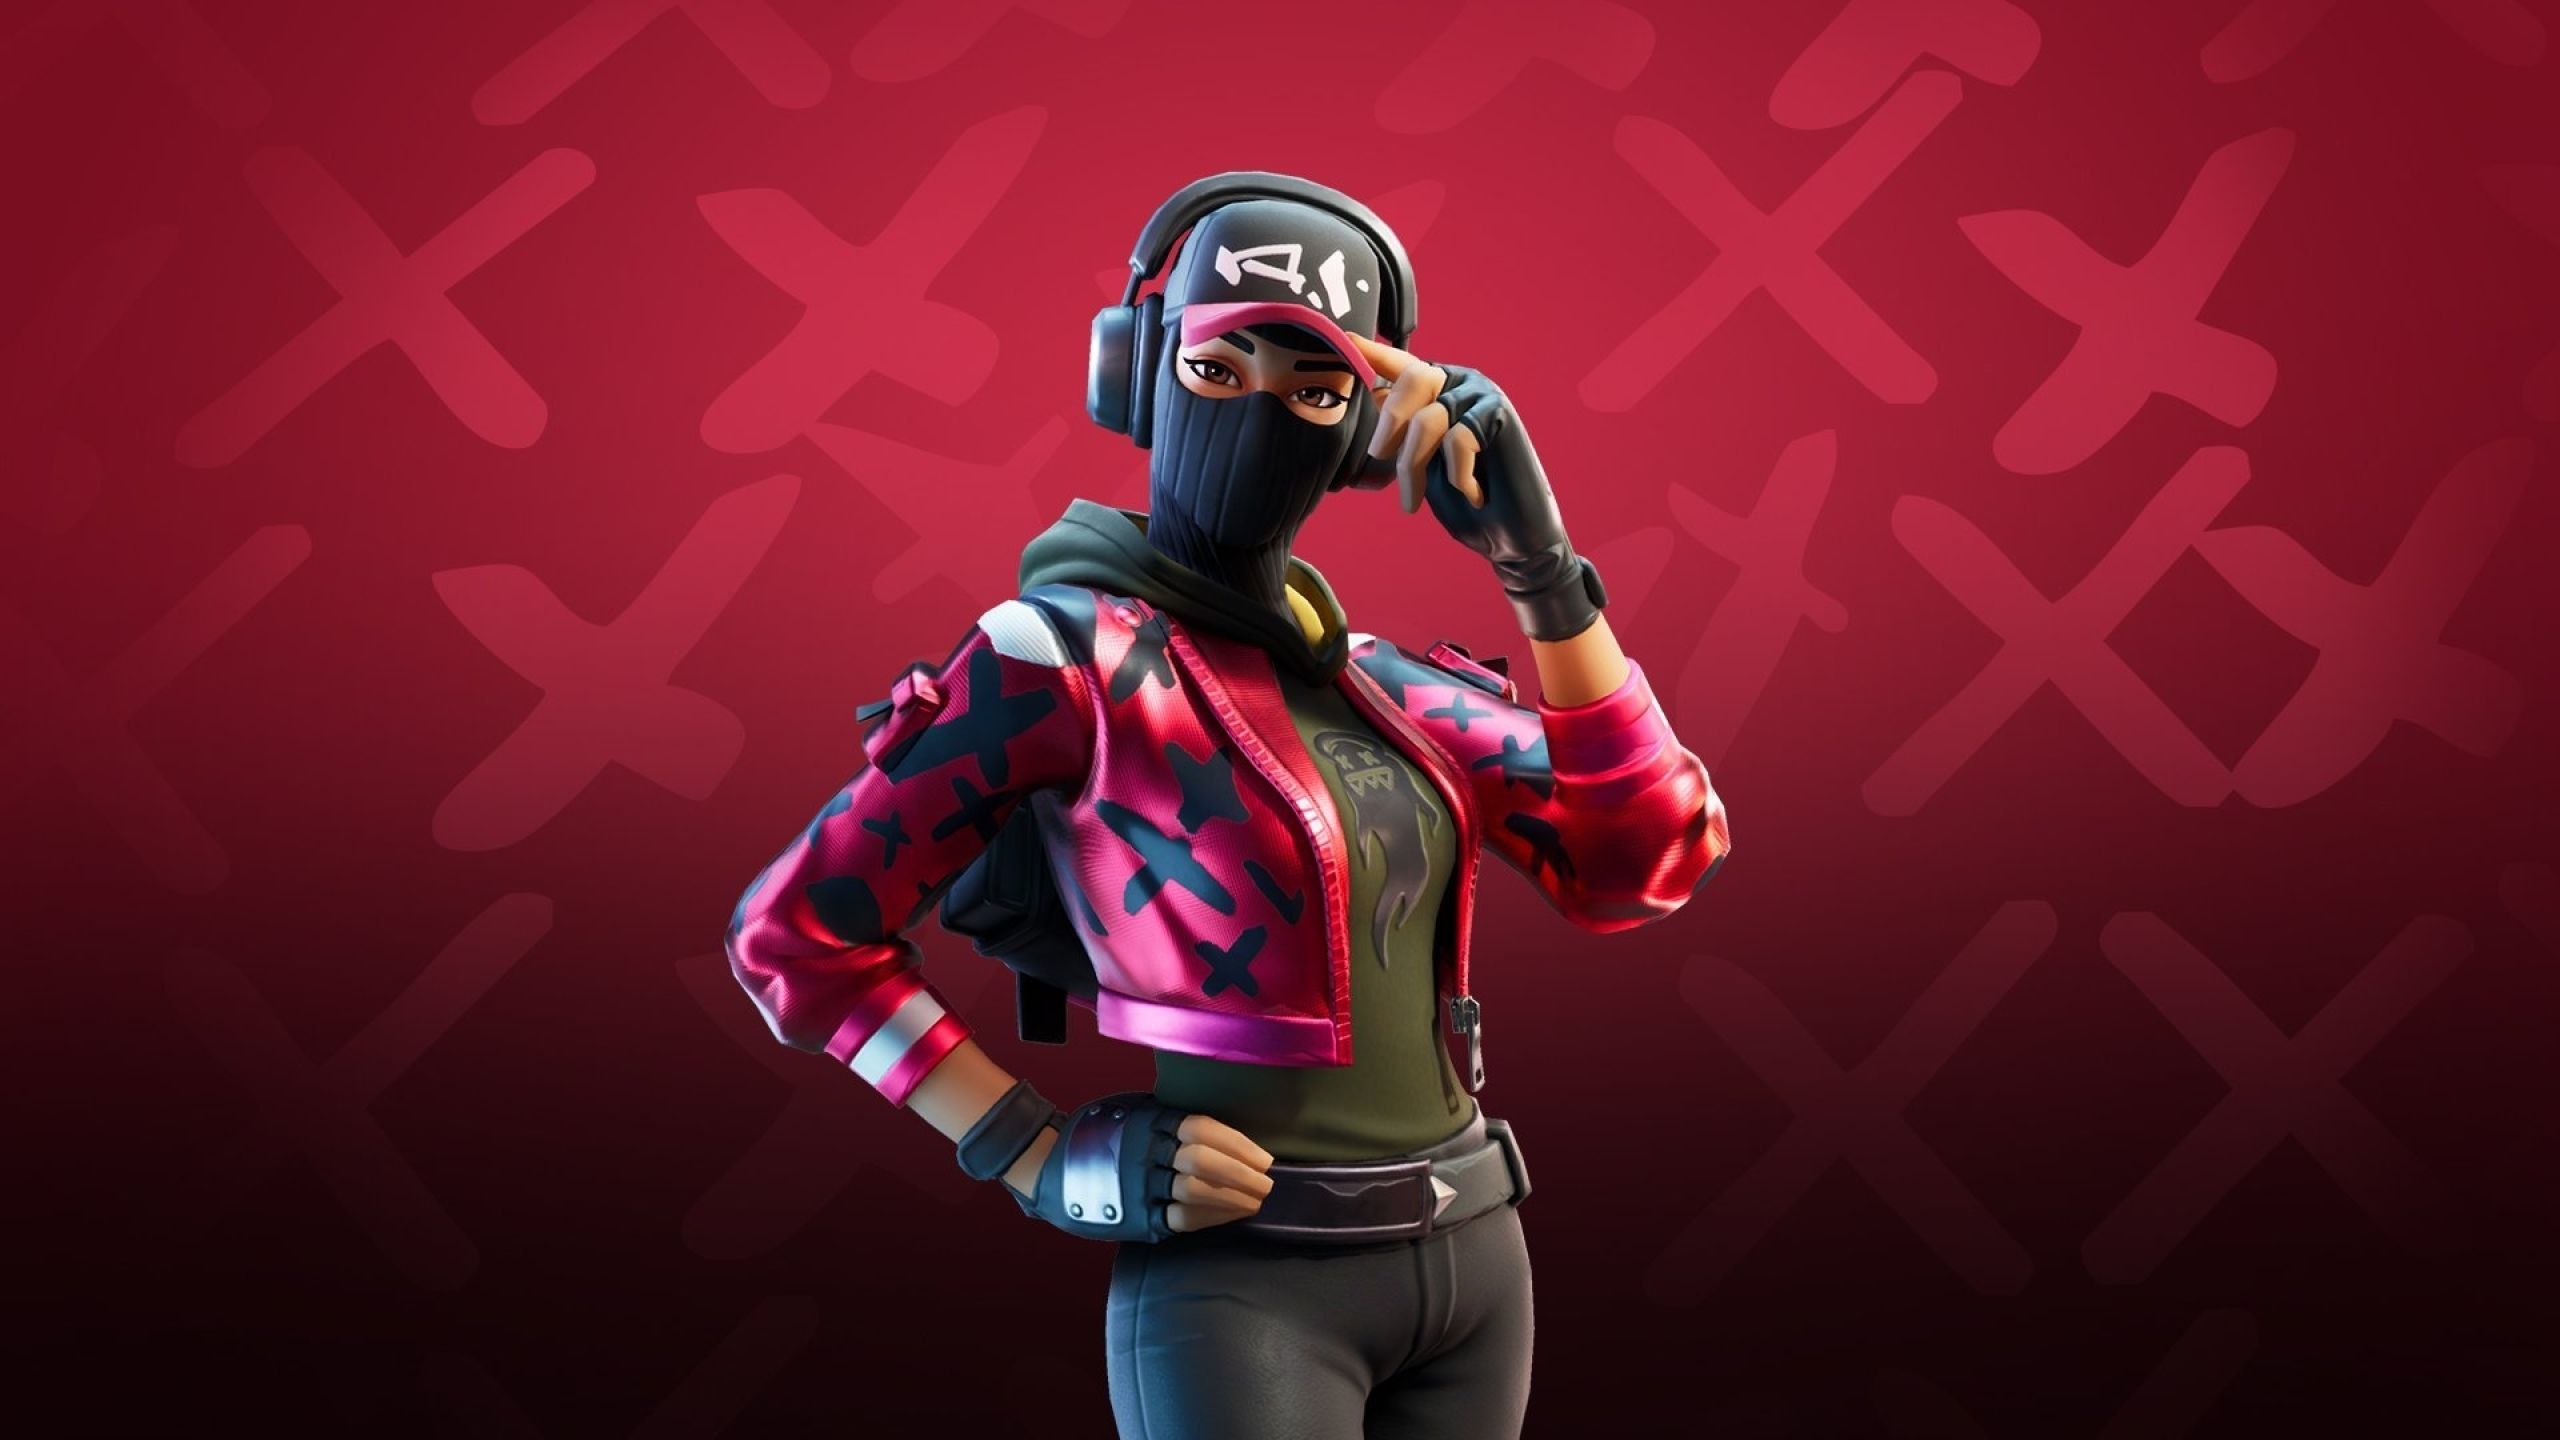 Riley Fortnite Skin 1440P Resolution Wallpaper, HD Games 4K Wallpaper, Image, Photo and Background